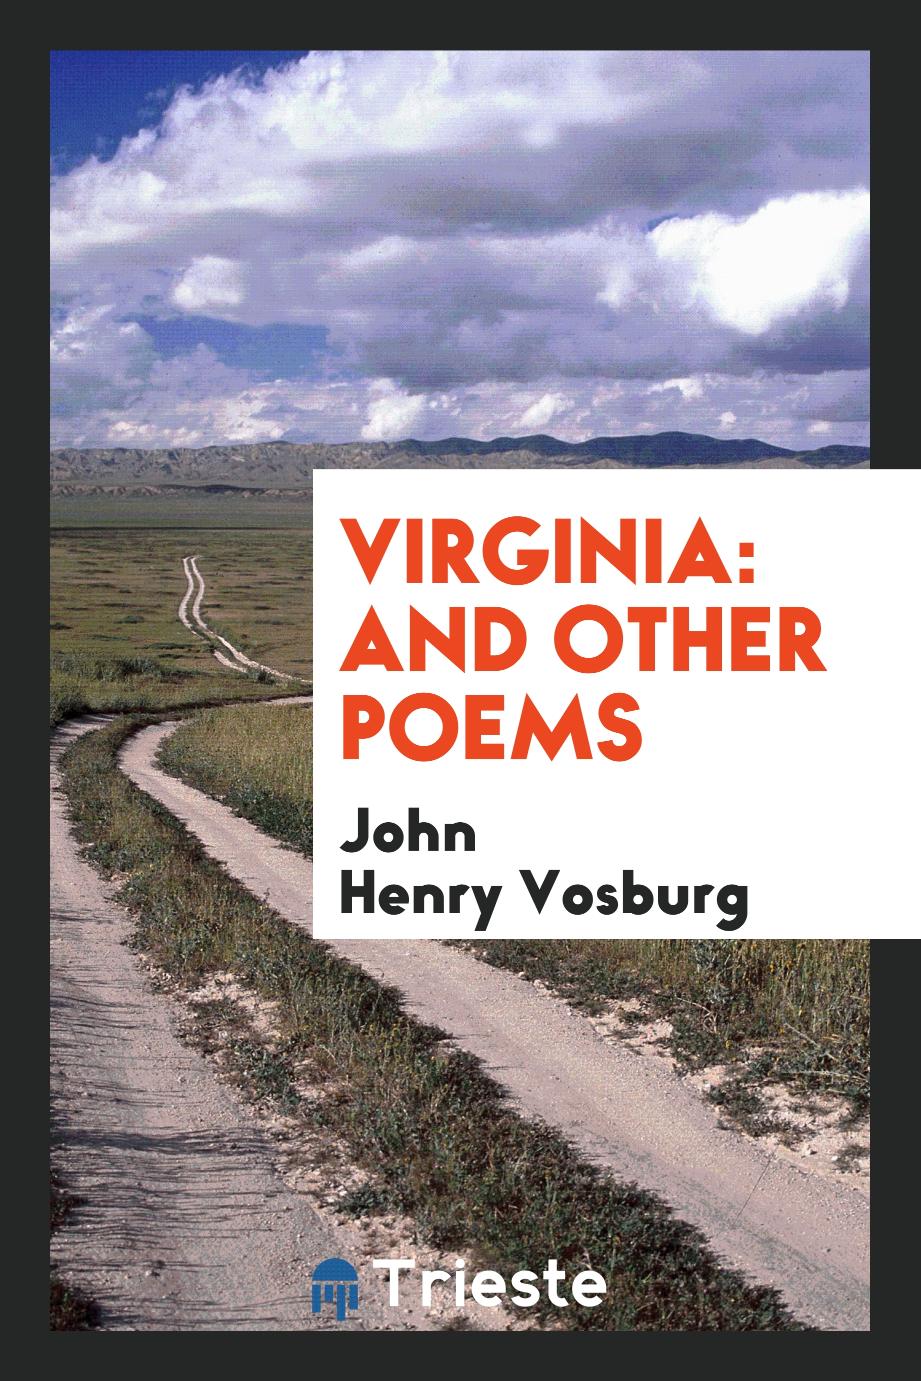 Virginia: And Other Poems